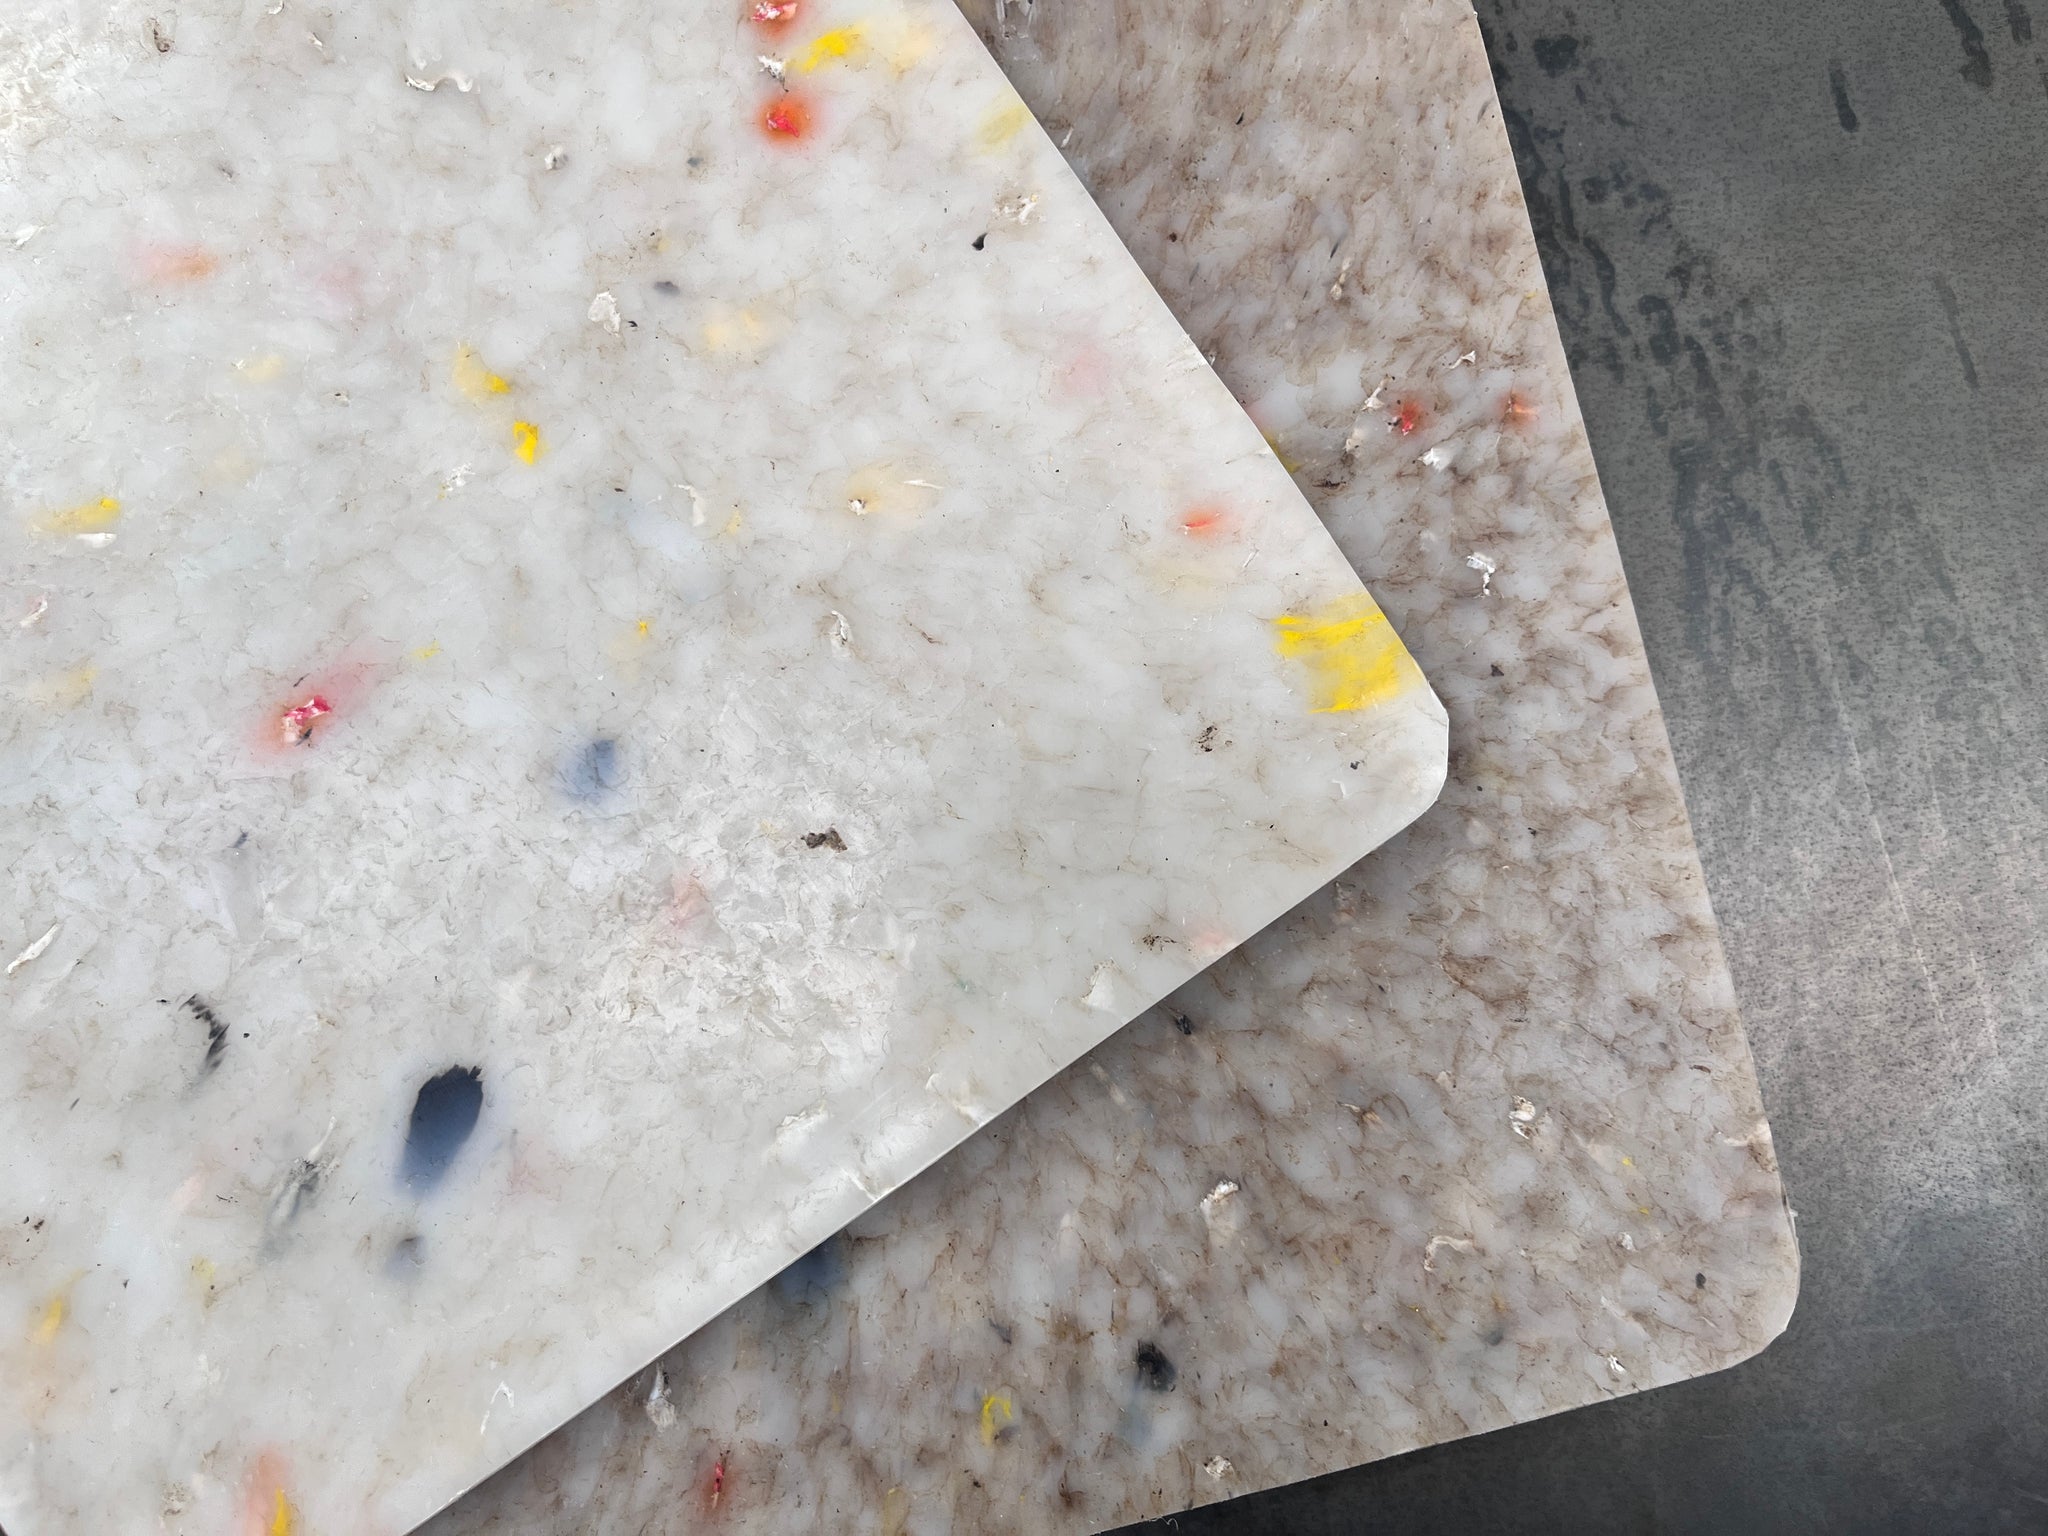 How dirty vs clean plastics can visually impact your Cleanstone